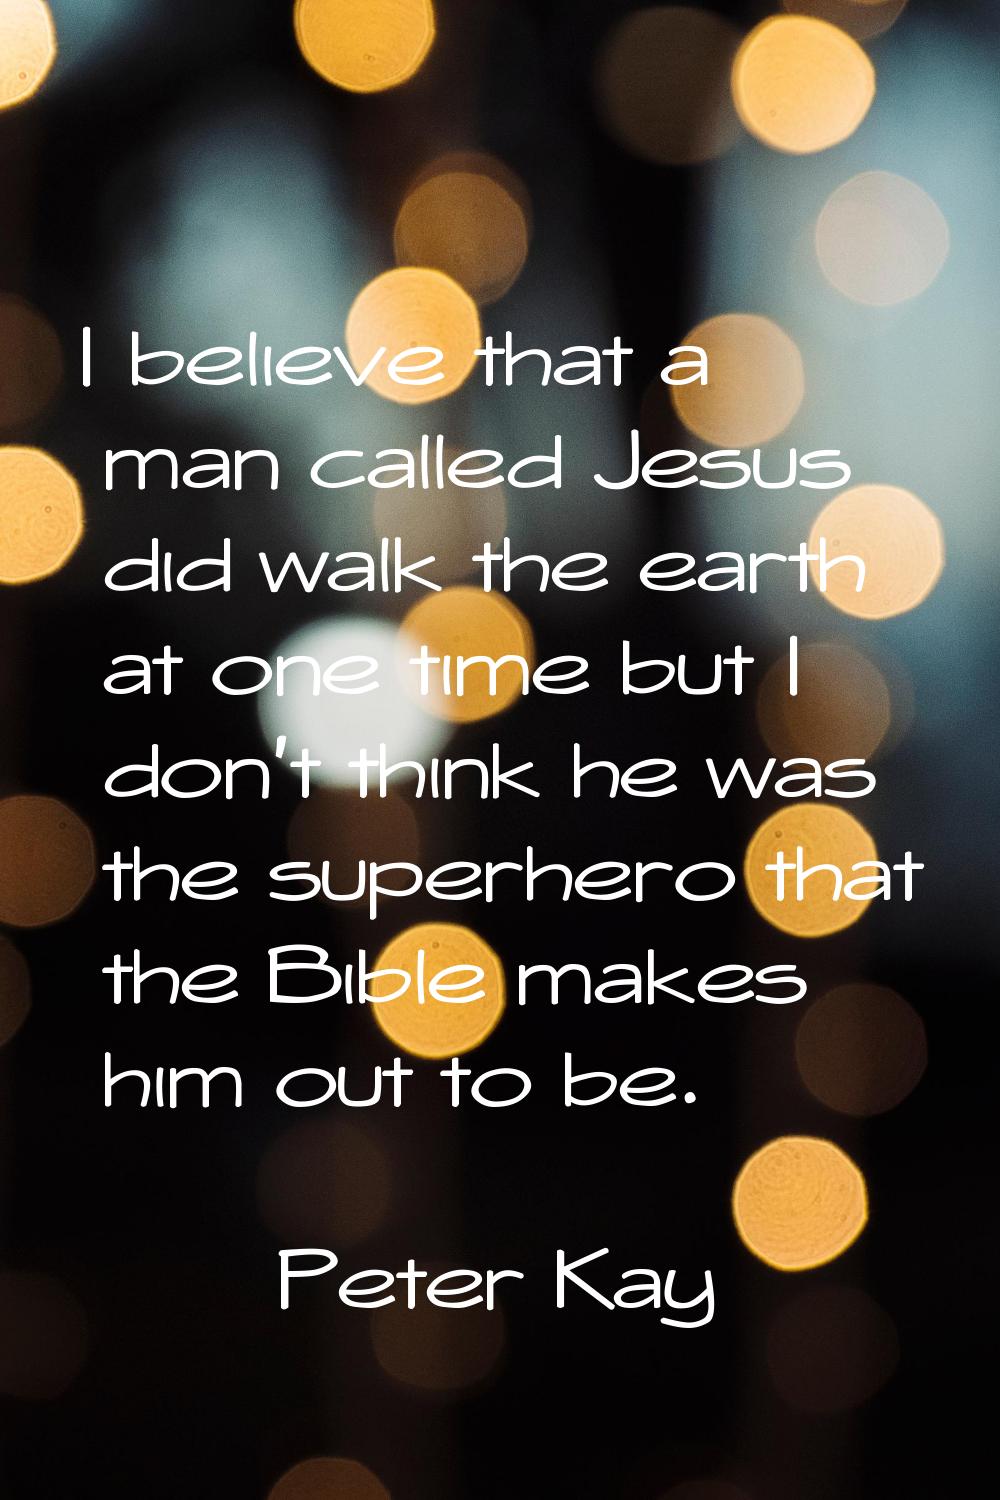 I believe that a man called Jesus did walk the earth at one time but I don't think he was the super